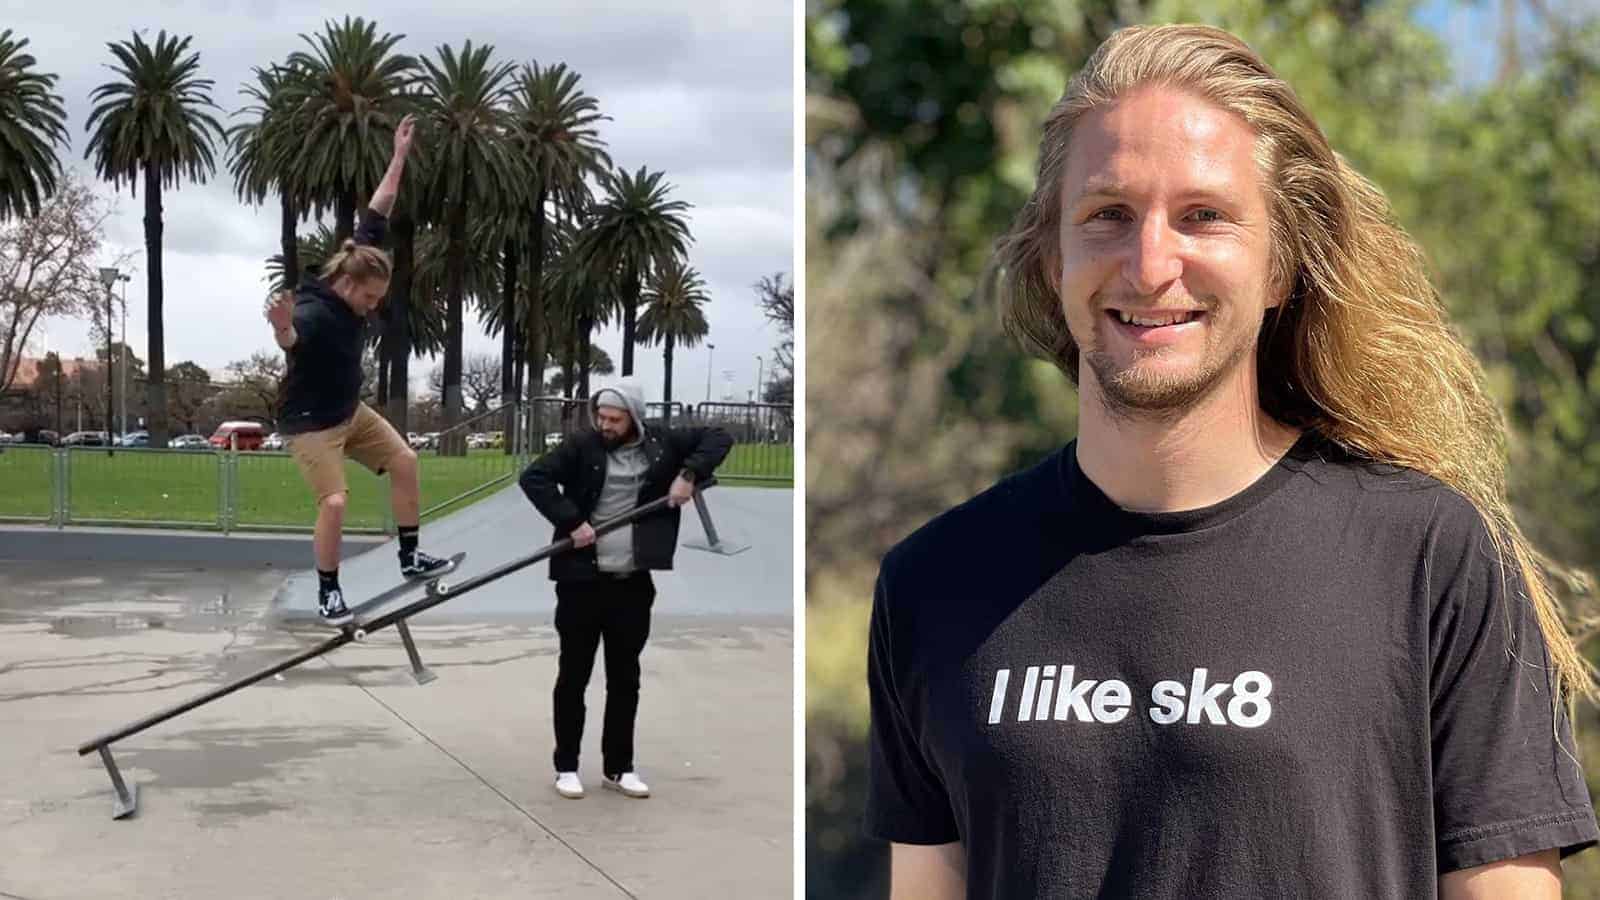 Professional Skateboarder Explains Why You’re Never Too Old to Try New Things